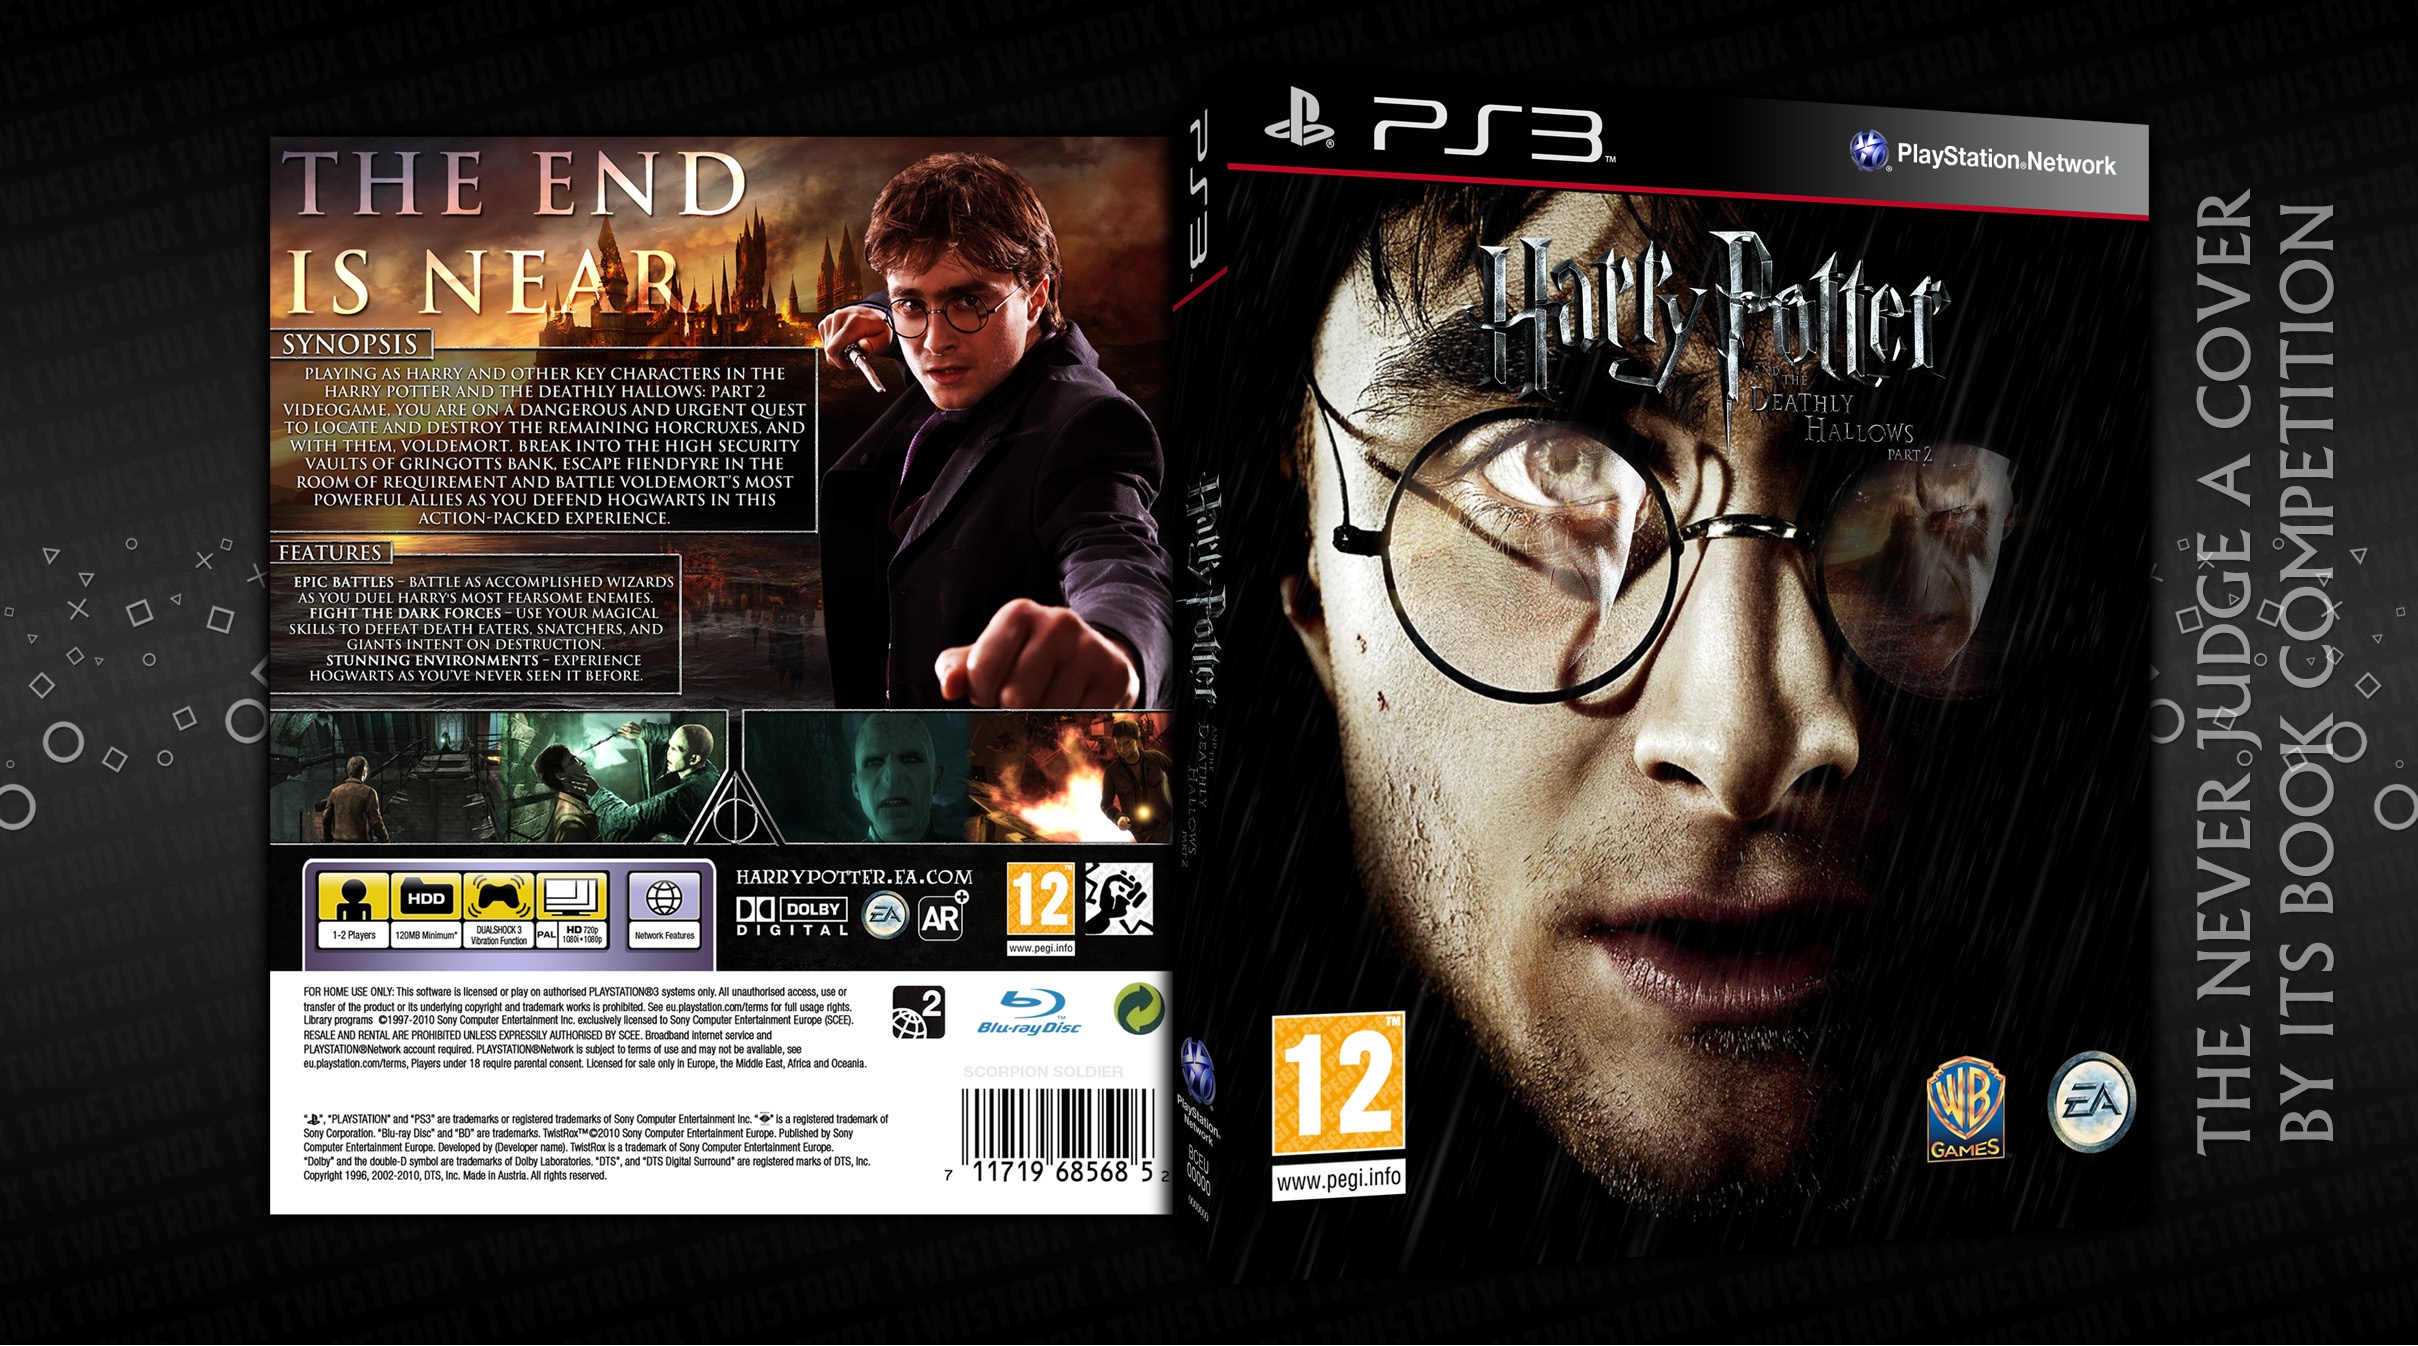 Harry Potter and the Deathly Hallows: Part 2 box cover